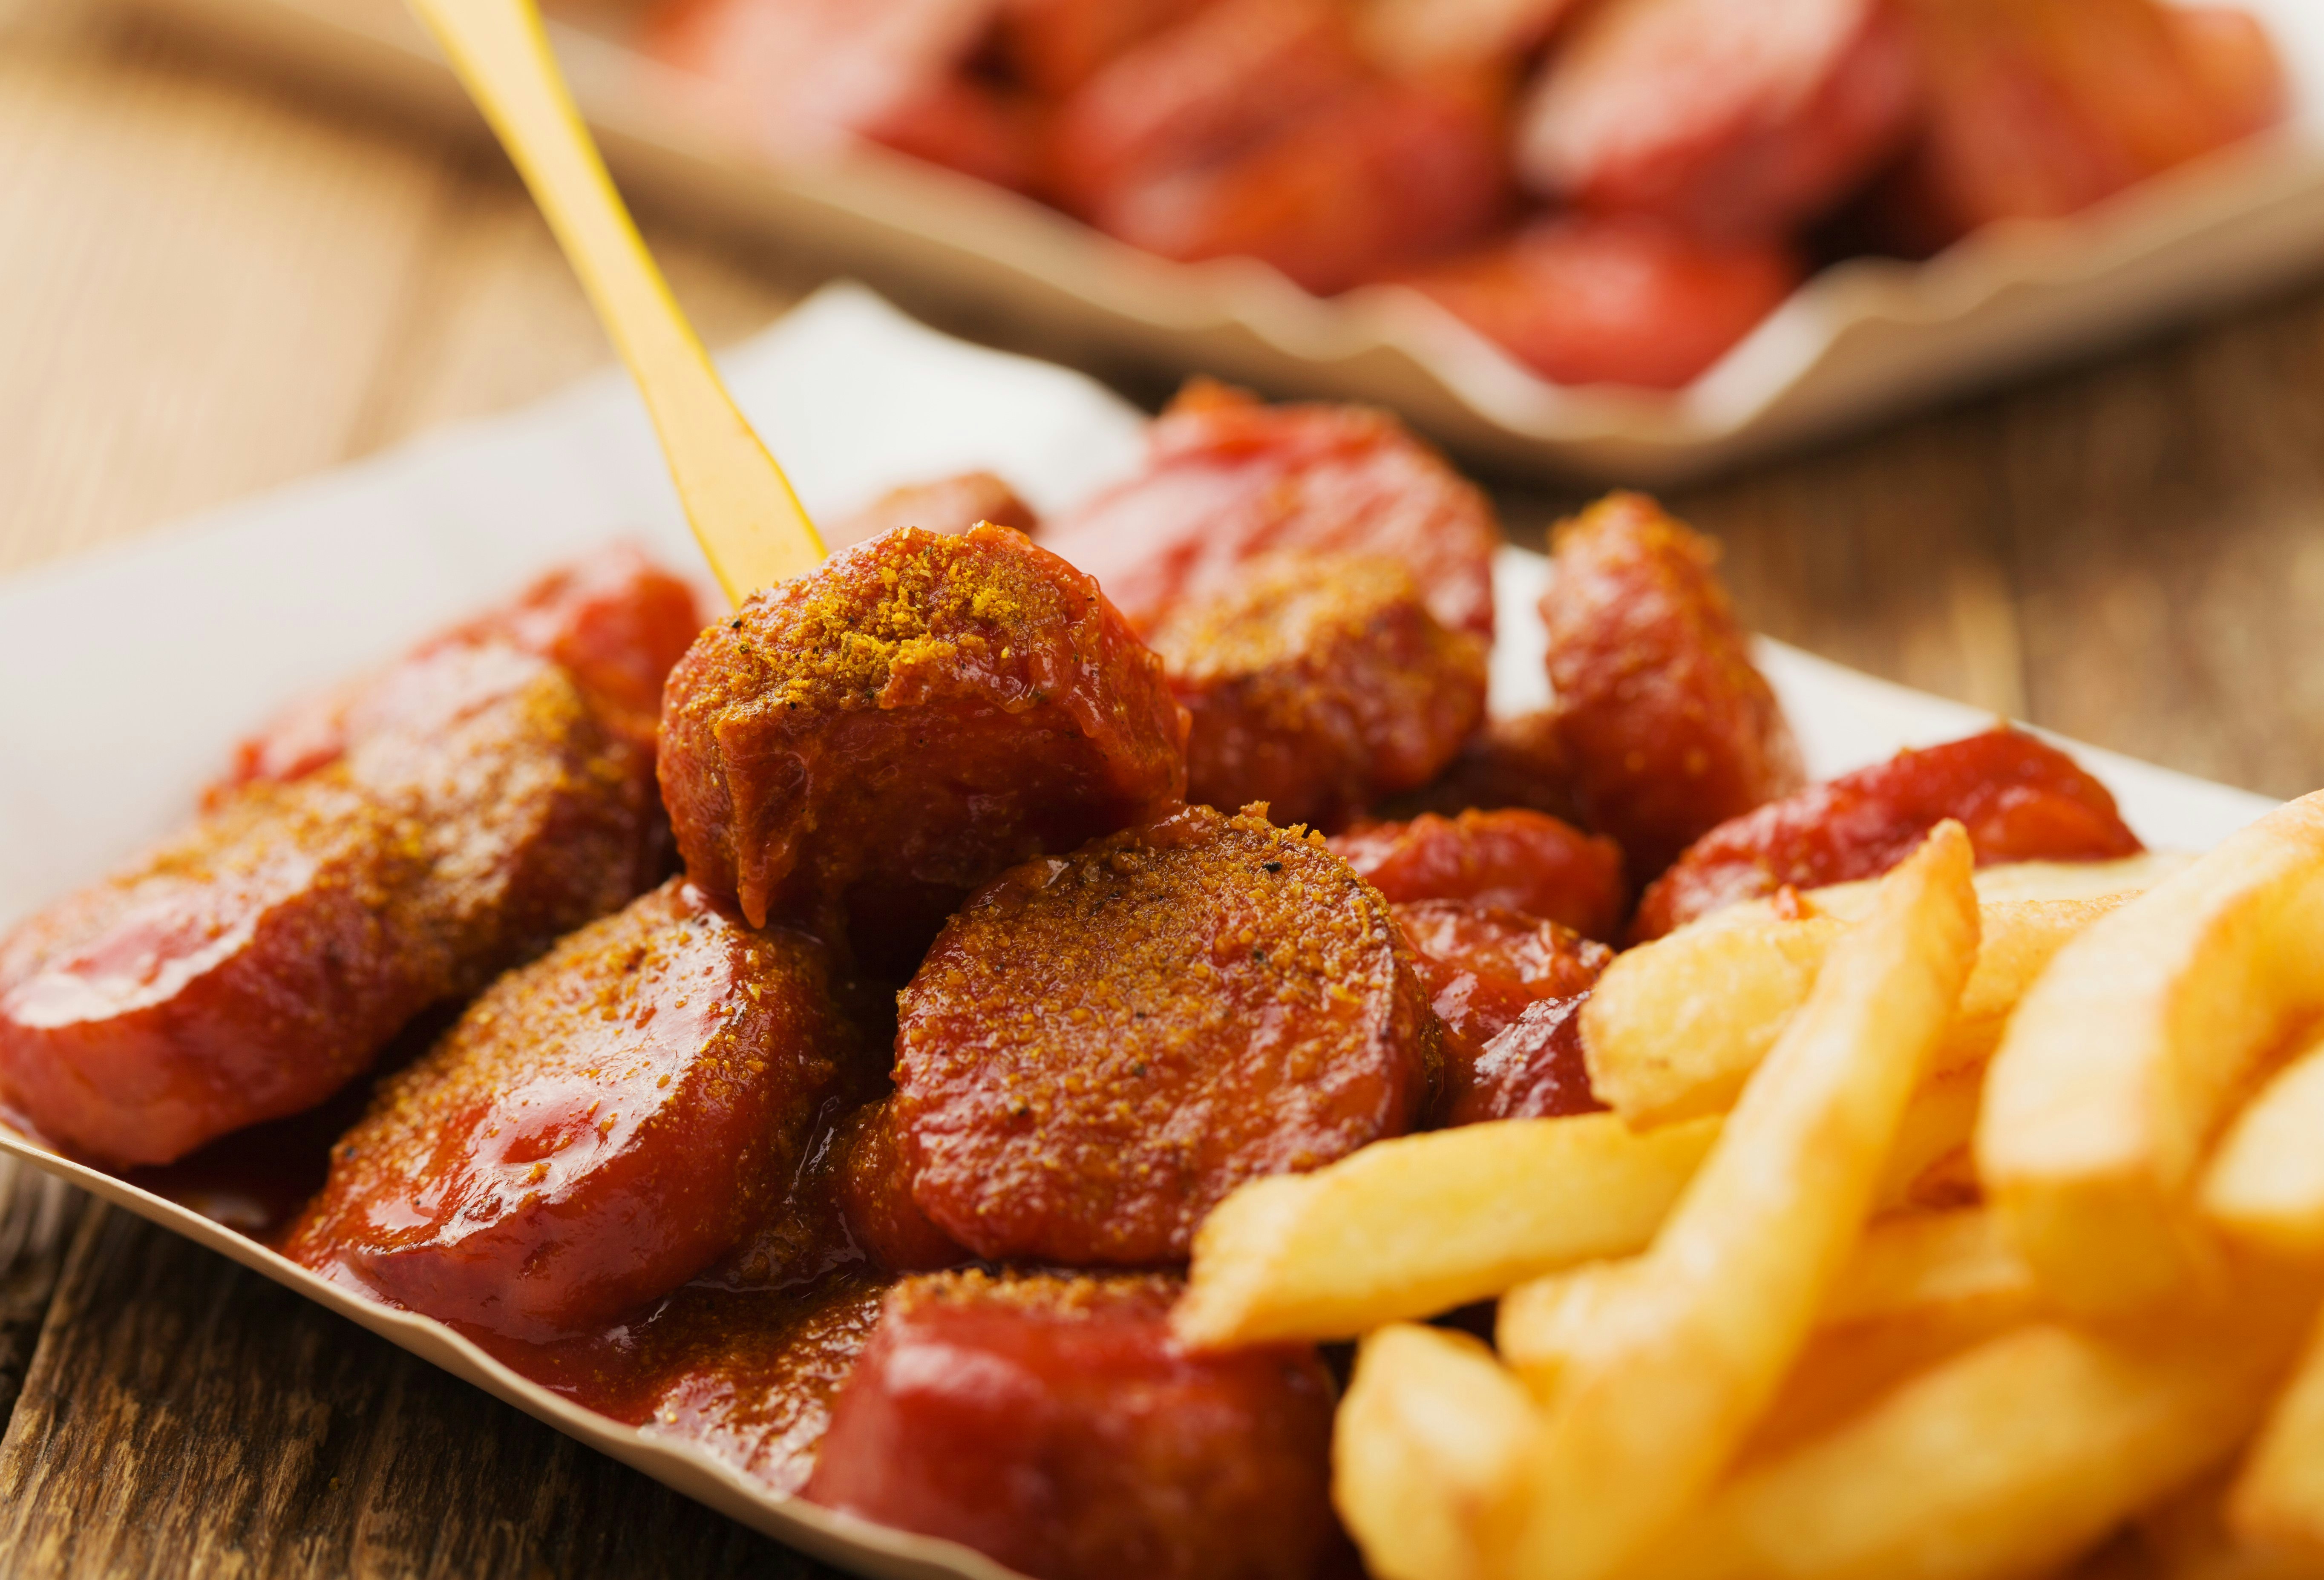 A close-up view of currywurst (cut up sausage with curry sauce) served with chips on a paper plate.